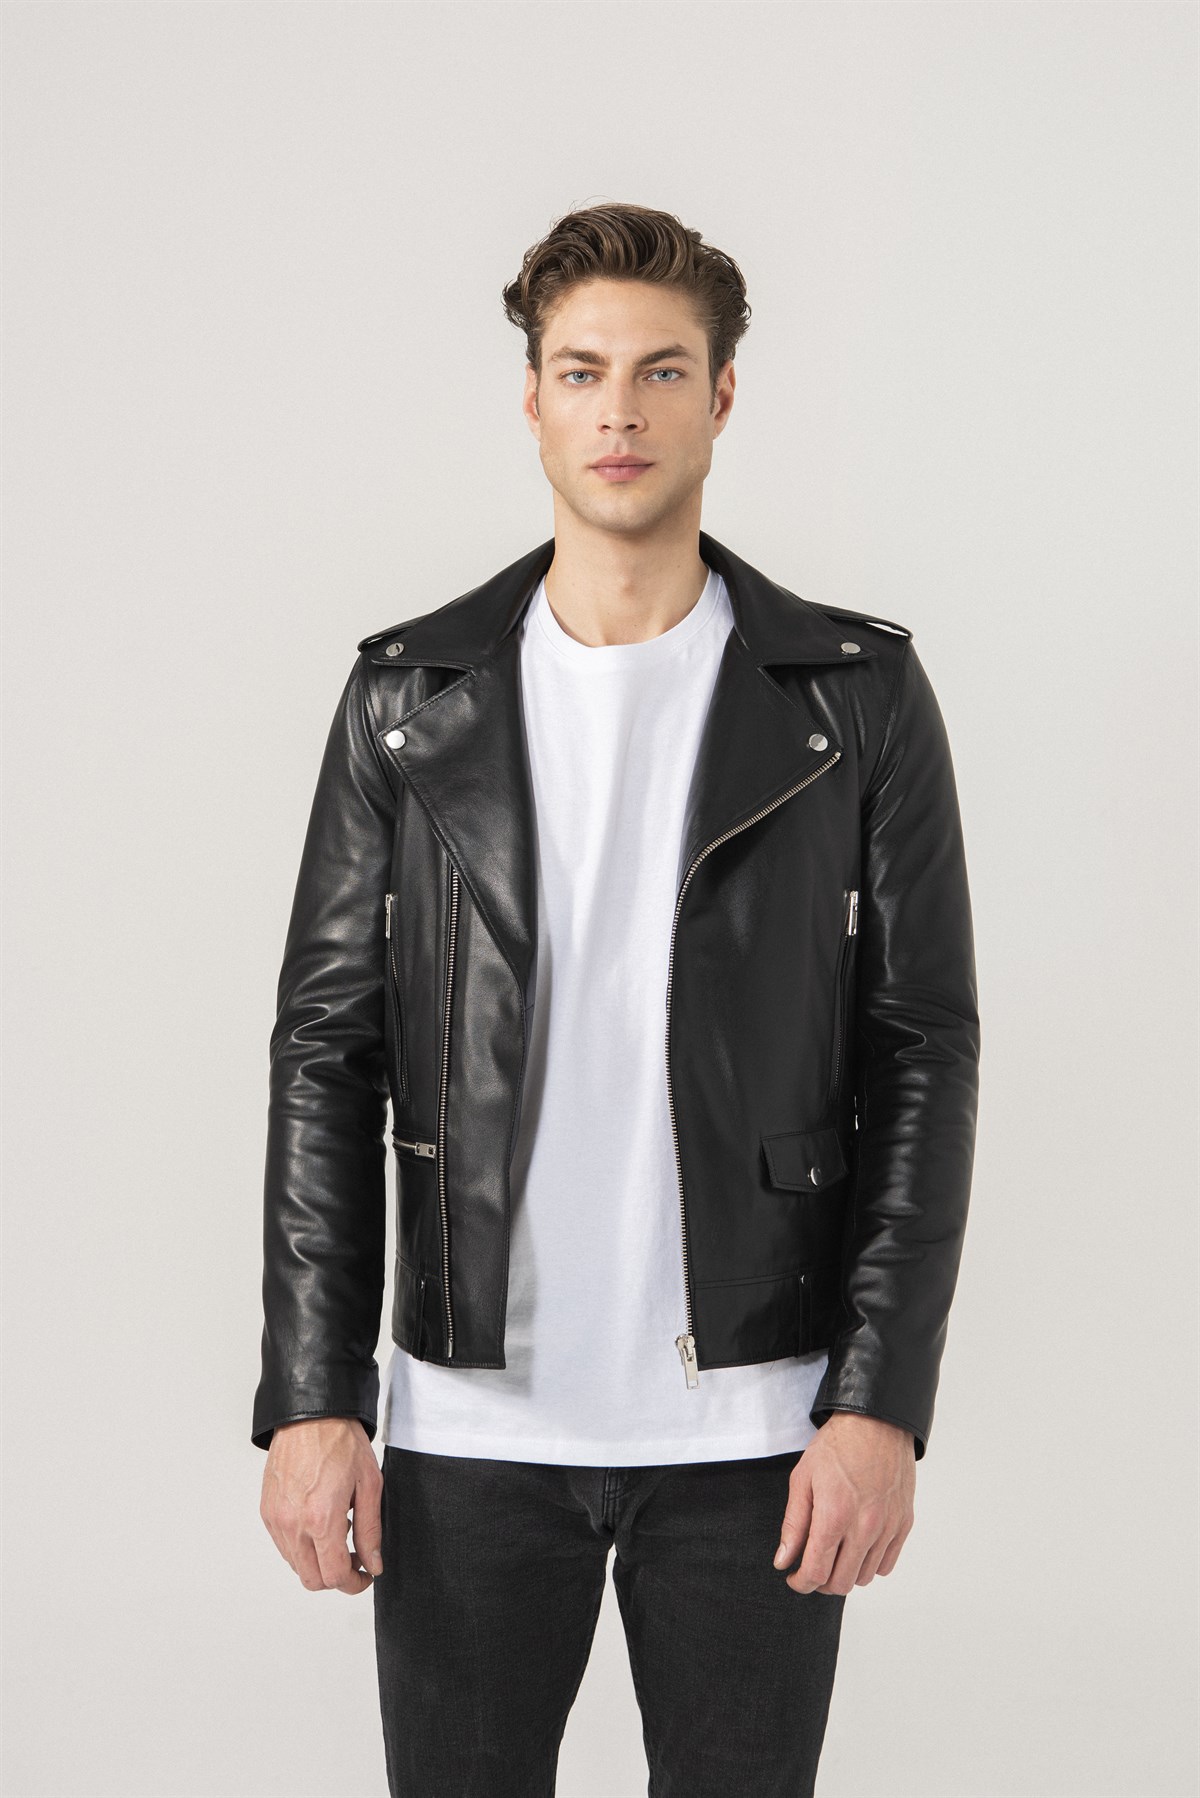 Leather Retail Jackets - Buy Leather Retail Jackets online in India